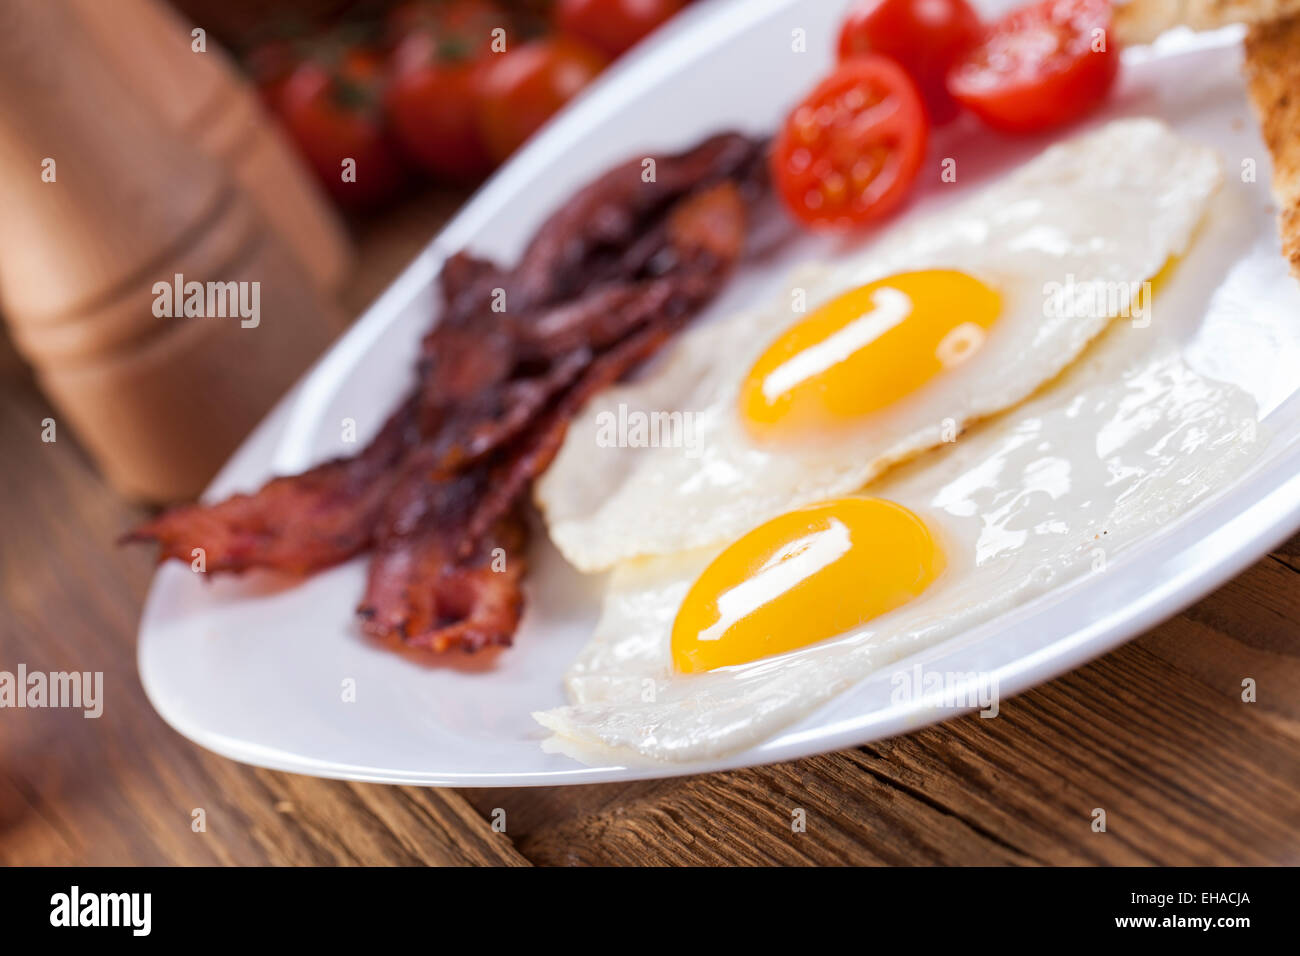 Fried egg and bacon on a plate with spices and vegetables. Studio shot Stock Photo